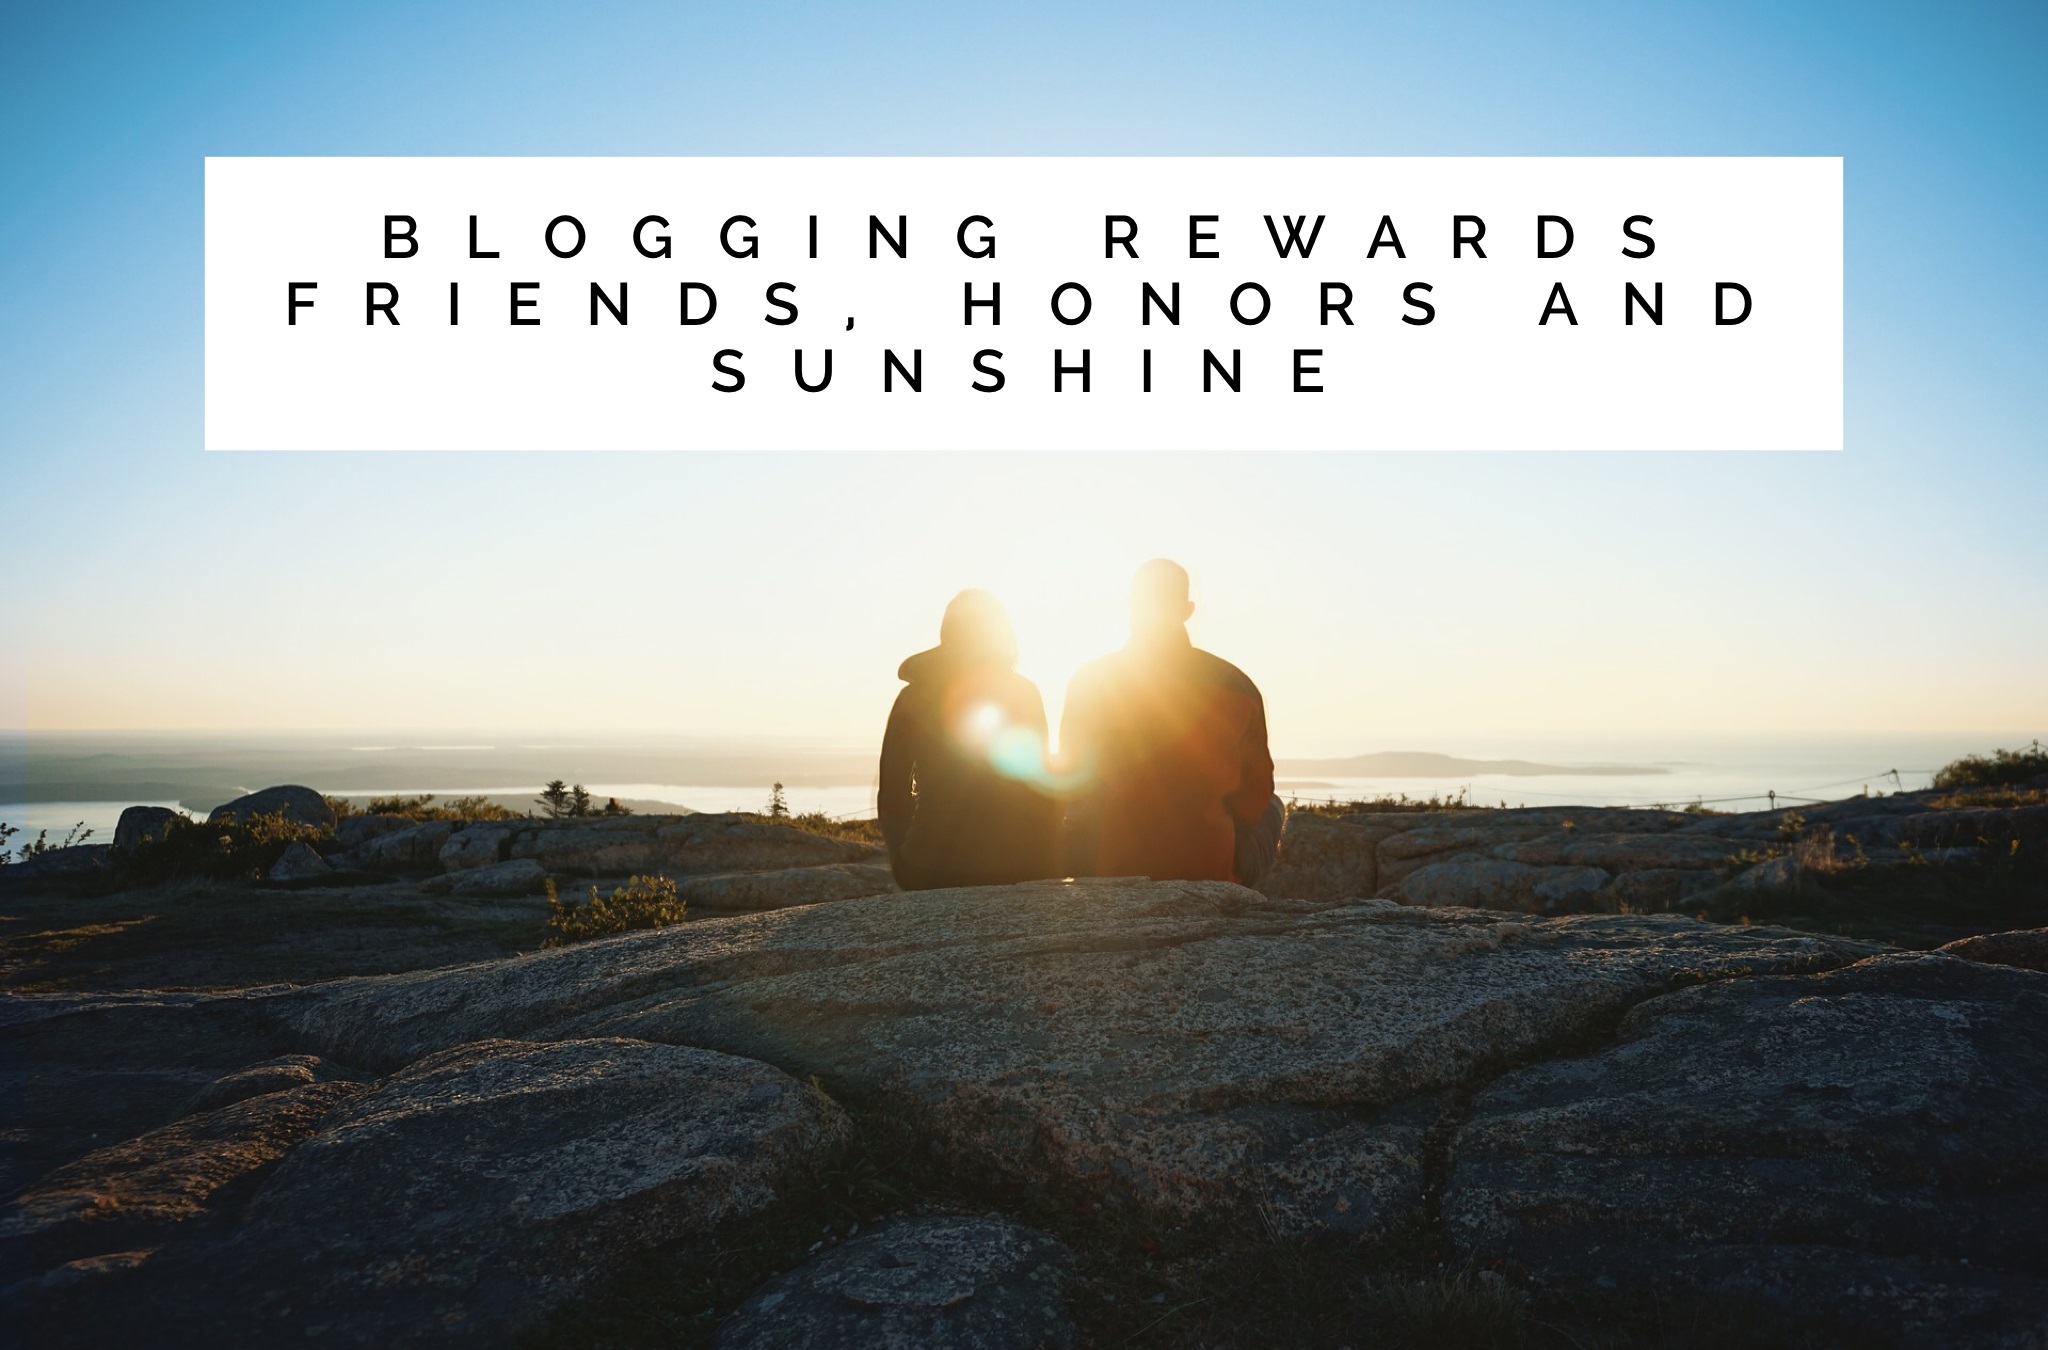 Blogging rewards friends, honors and sunshine